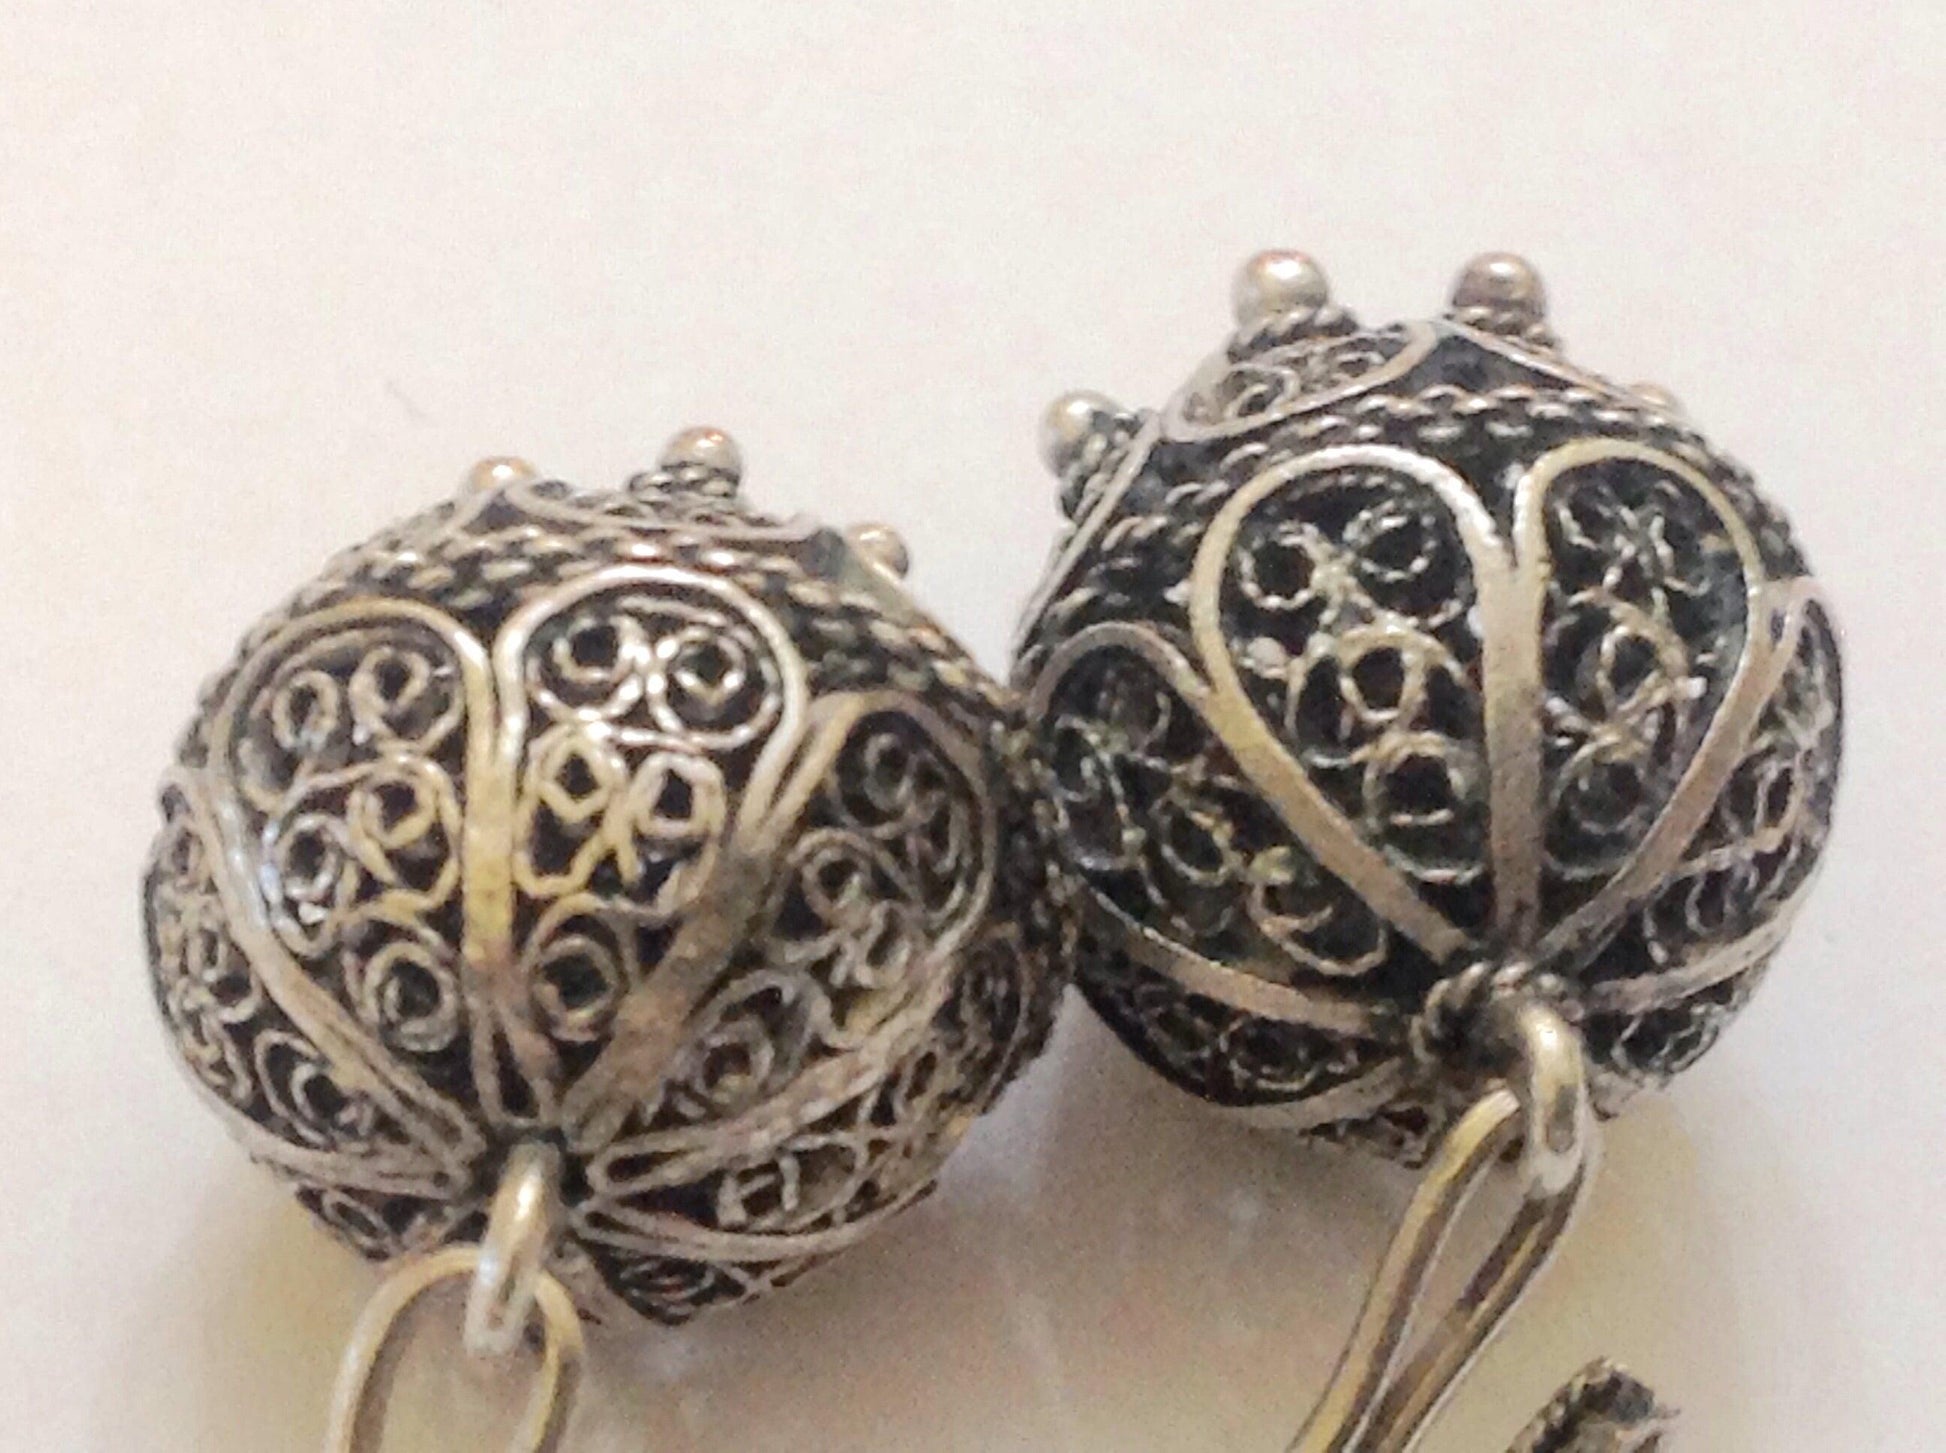 Vintage Balkan Filigree Buttons from Bosnia Silver and Coral - Anteeka